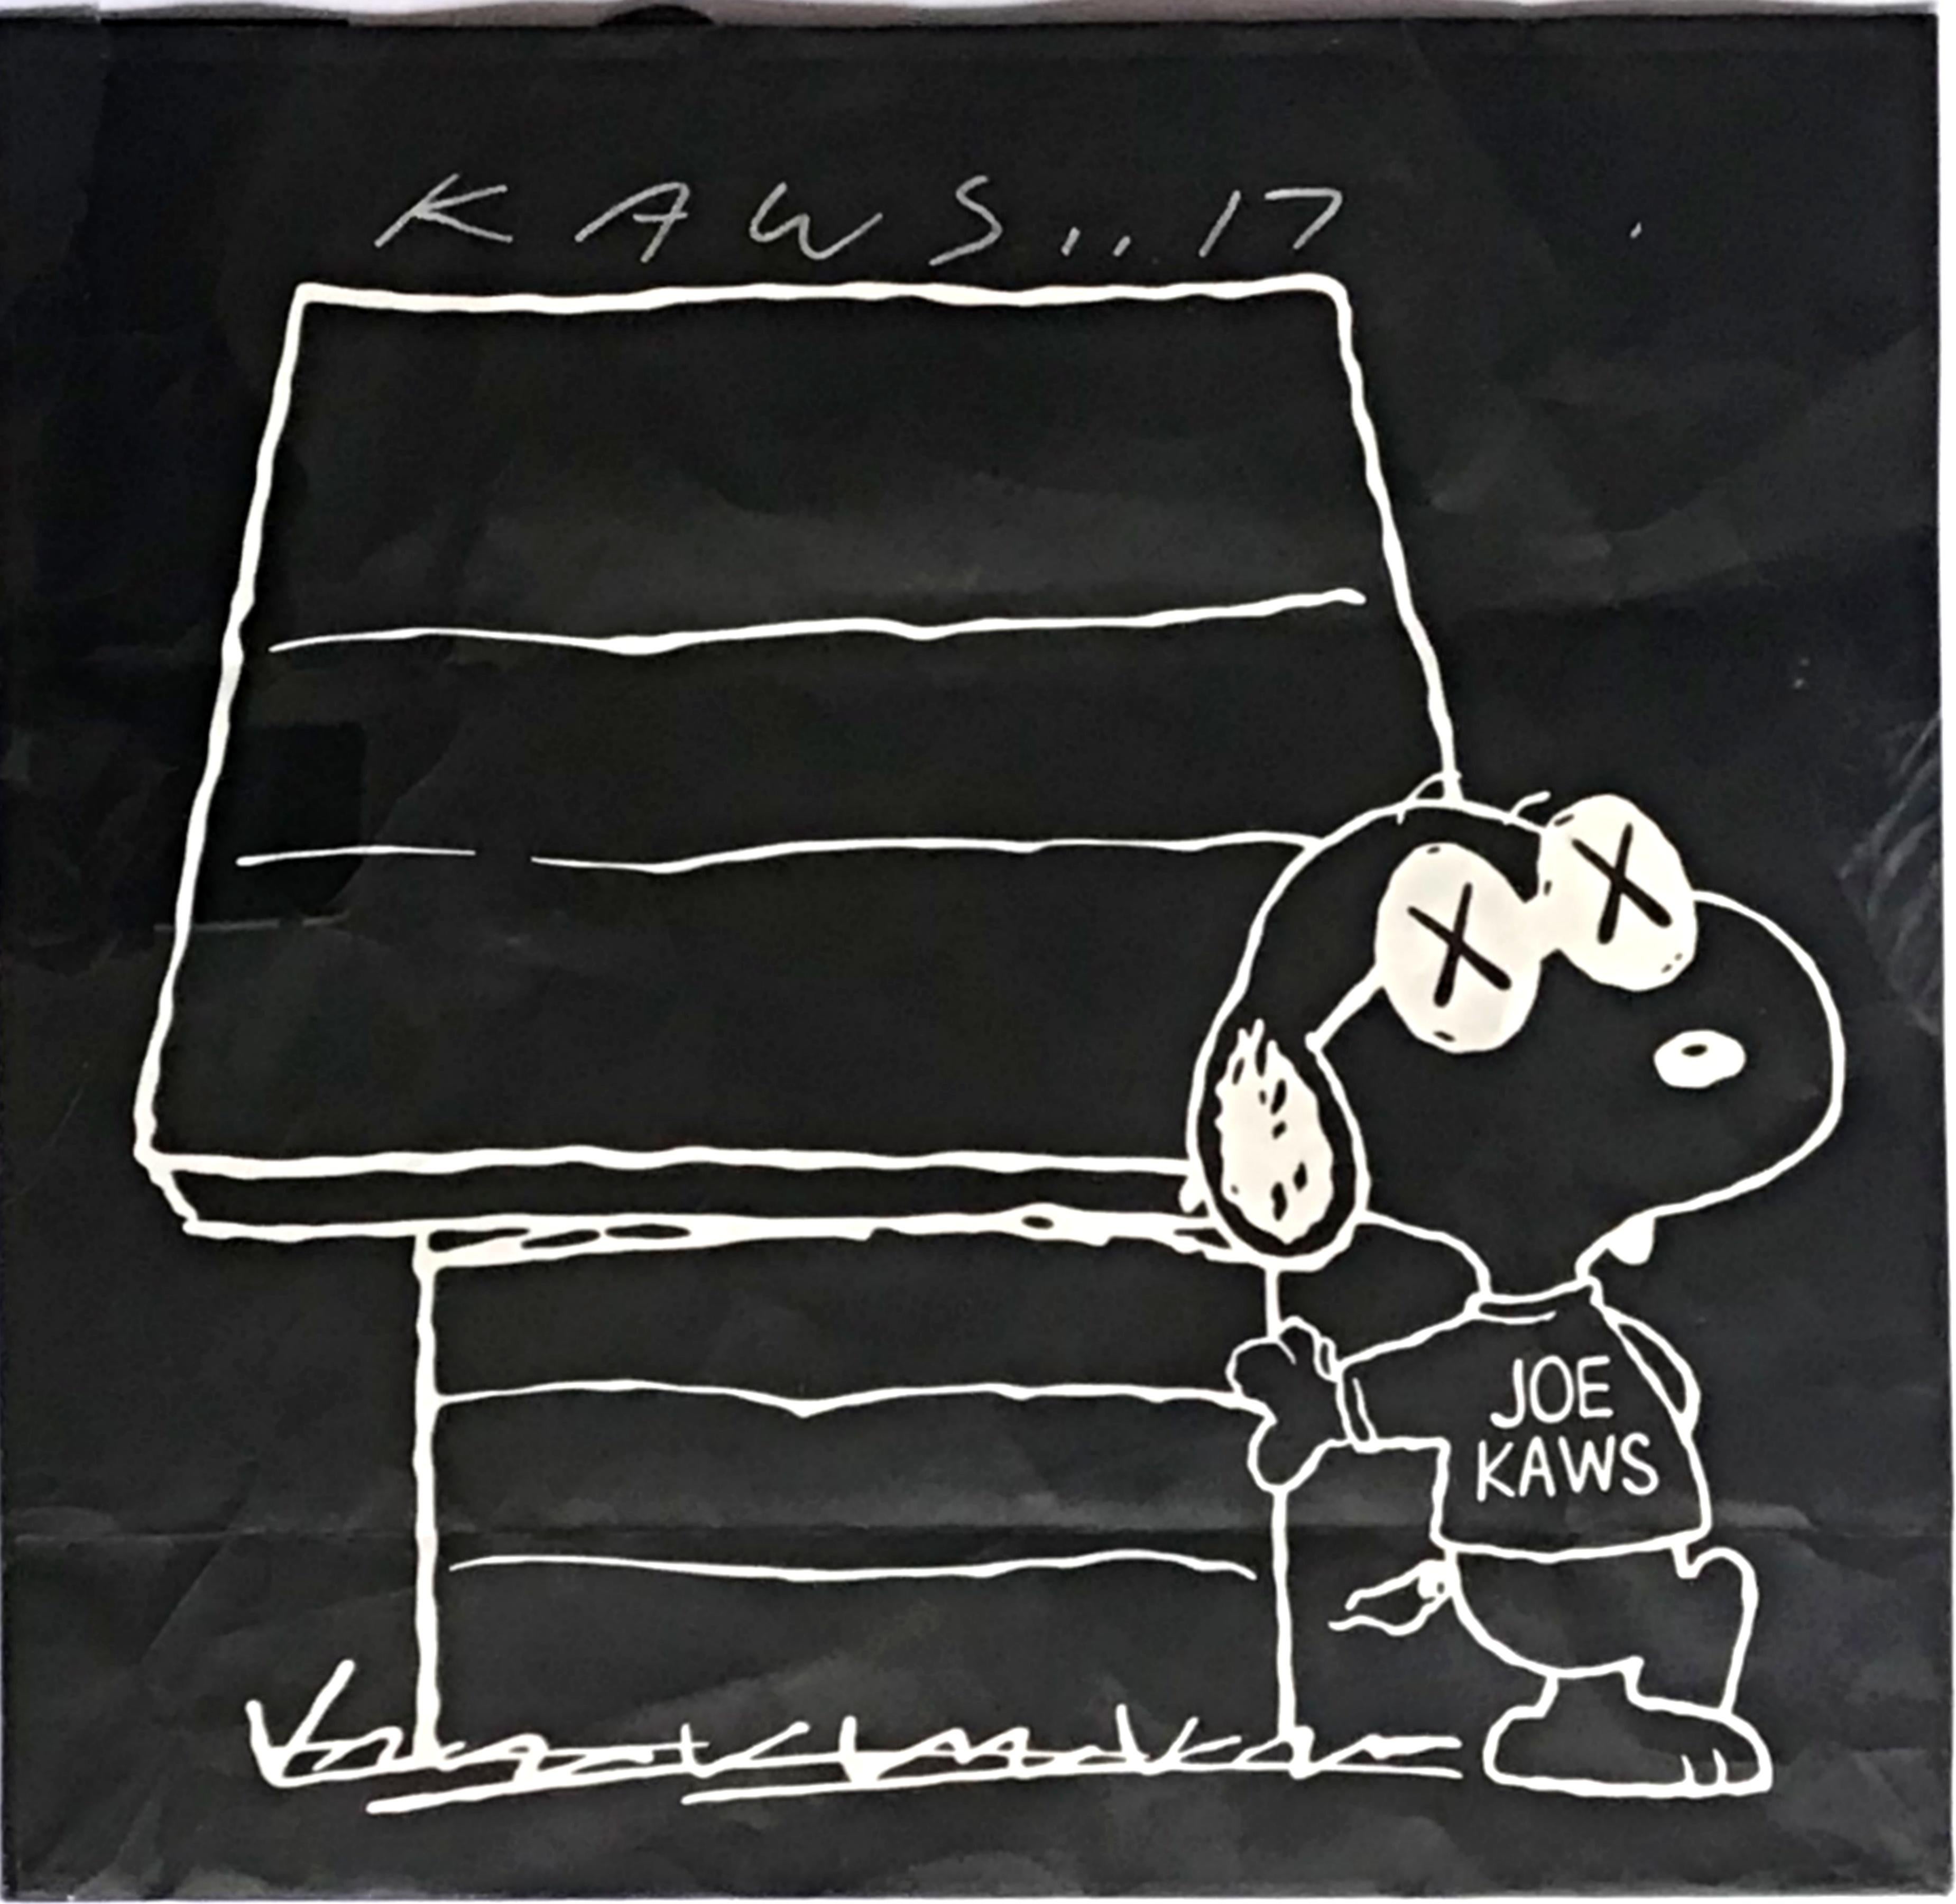 KAWS
Artist designed shopping bag (Hand signed by KAWS), 2017
Offset lithograph on shopping bag. 
Hand signed and dated by KAWS on the front
15 1/4 × 15 1/4 inches
Unframed
Limited edition, hand signed KAWS shopping bag from the release of the